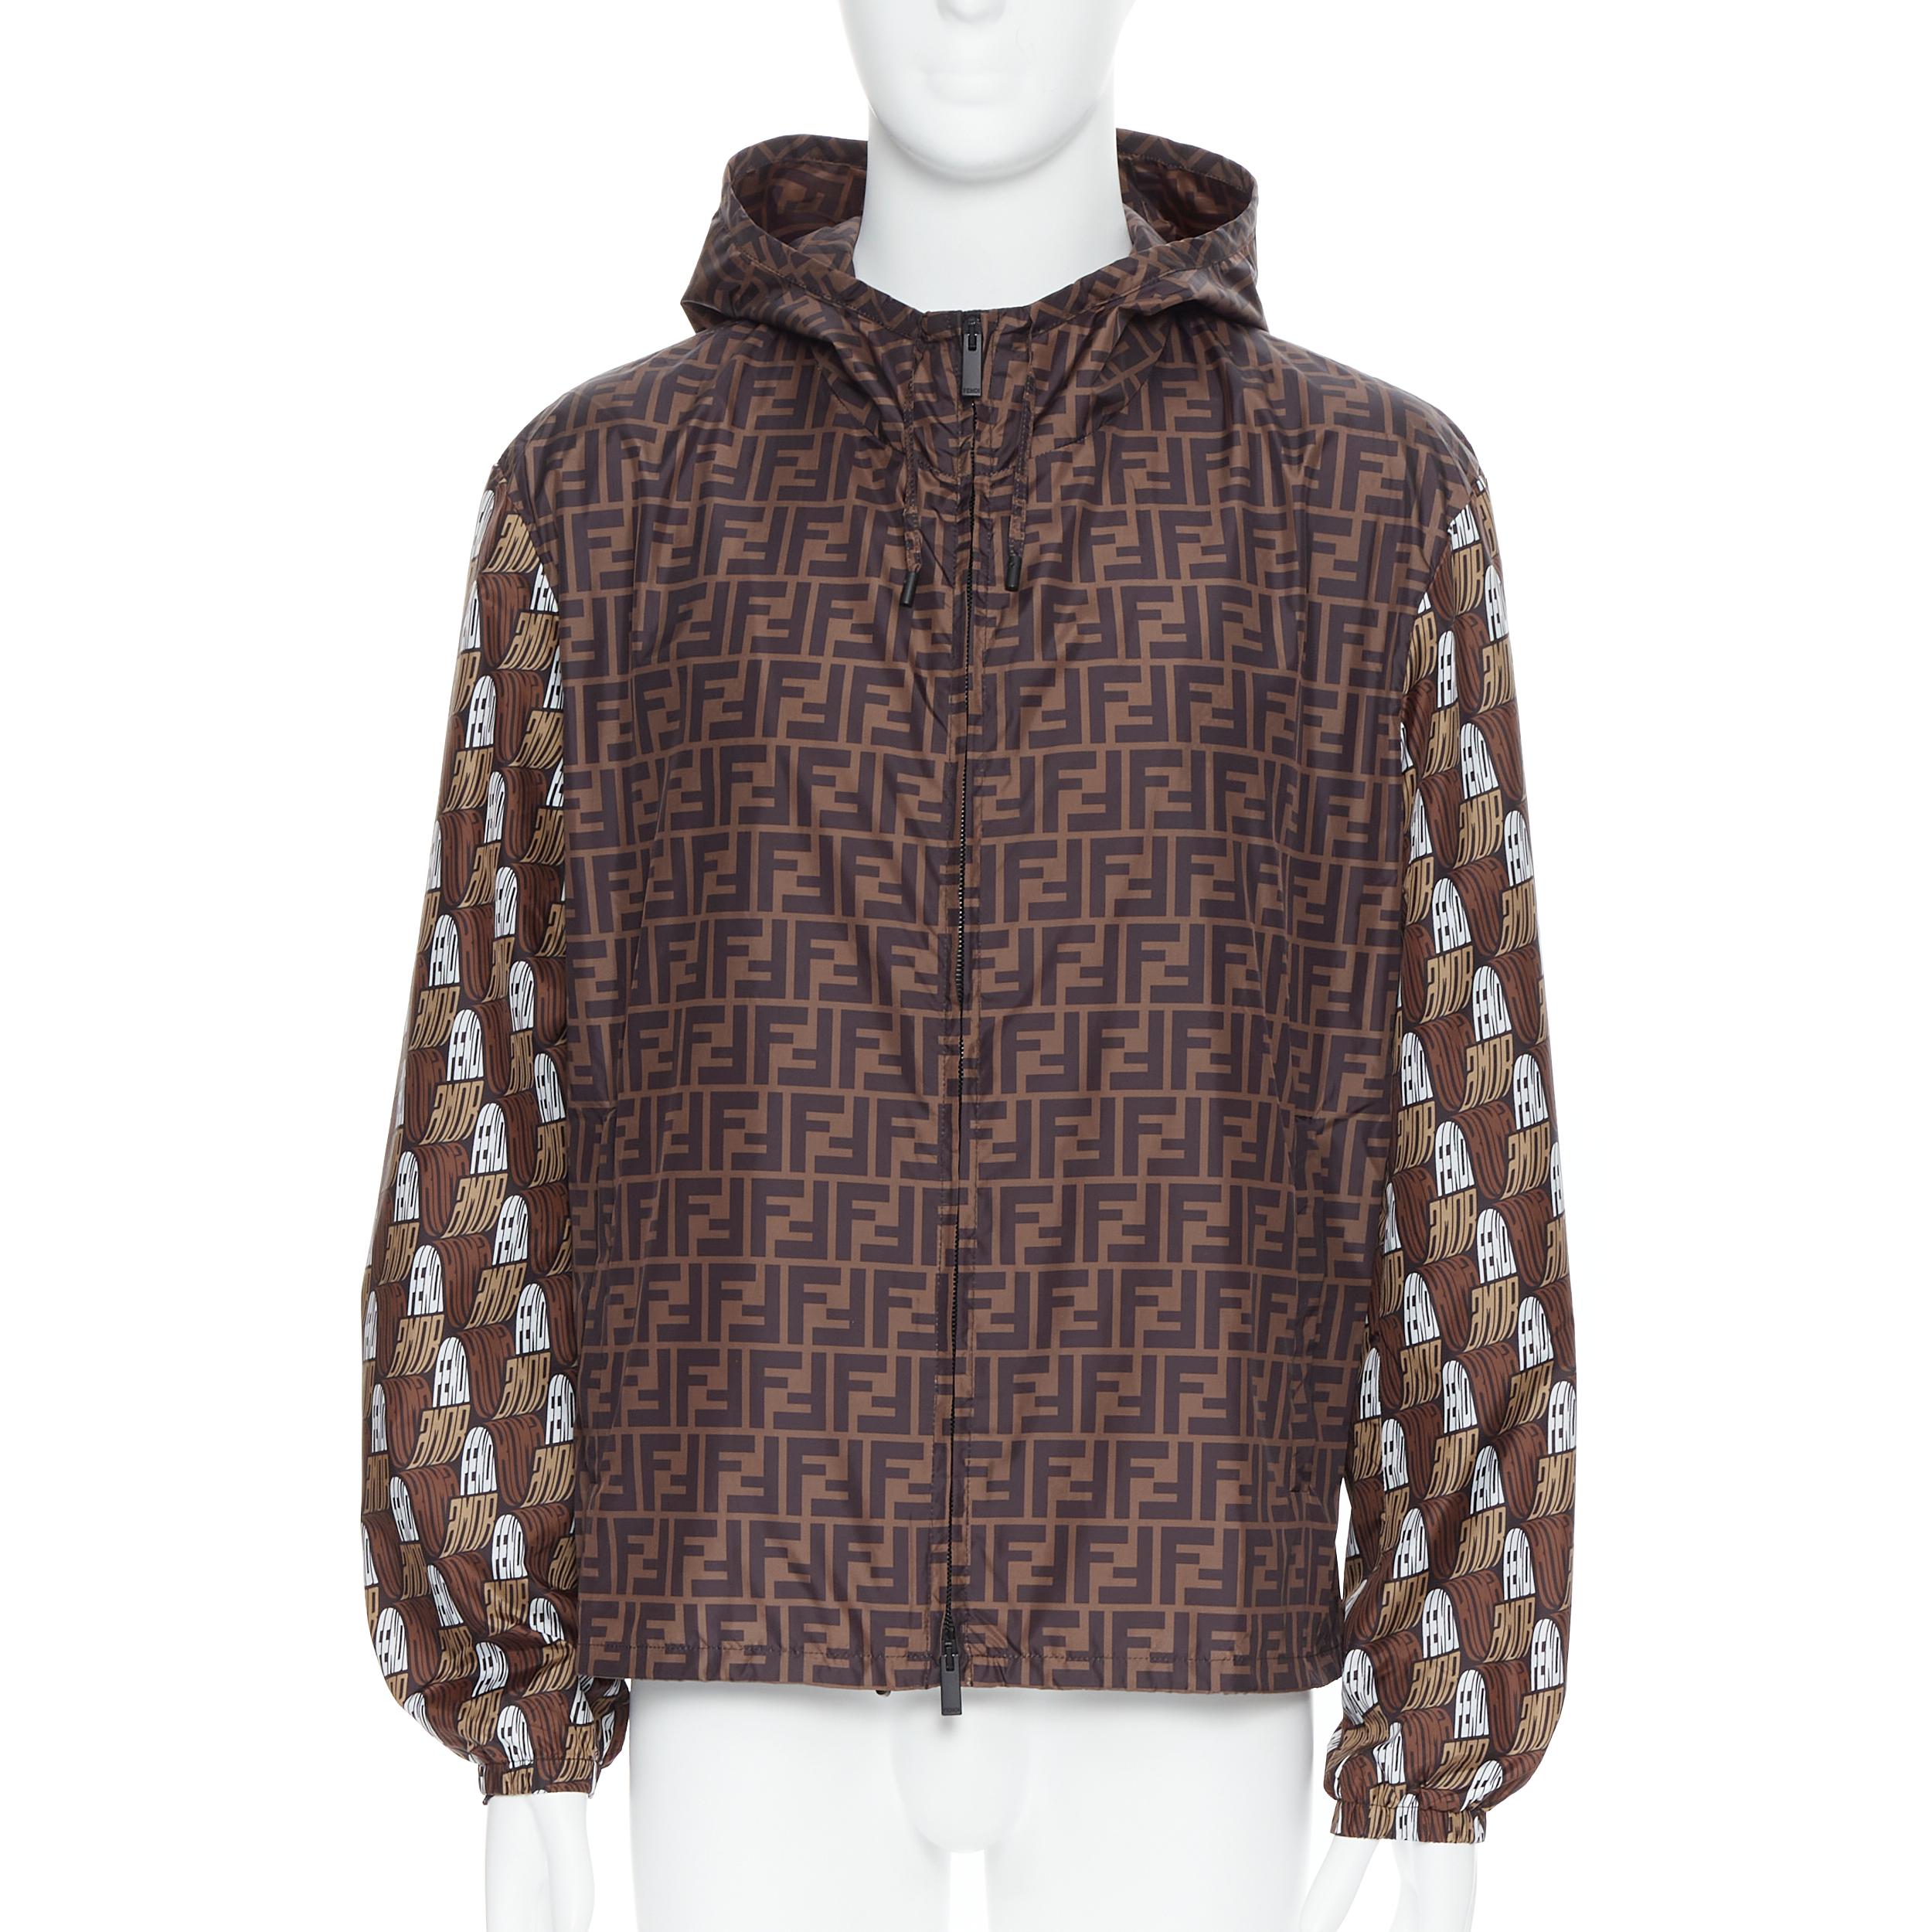 new FENDI Roma Amor Zucca monogram print gold embroidery windbreaker jacket IT54 Reference: TGAS/B00351 Brand: Fendi Material: Nylon Color: Brown Pattern: Other Closure: Zip Extra Detail: Zucca monogram print. Fendi Roma Amor print on both sleeves.